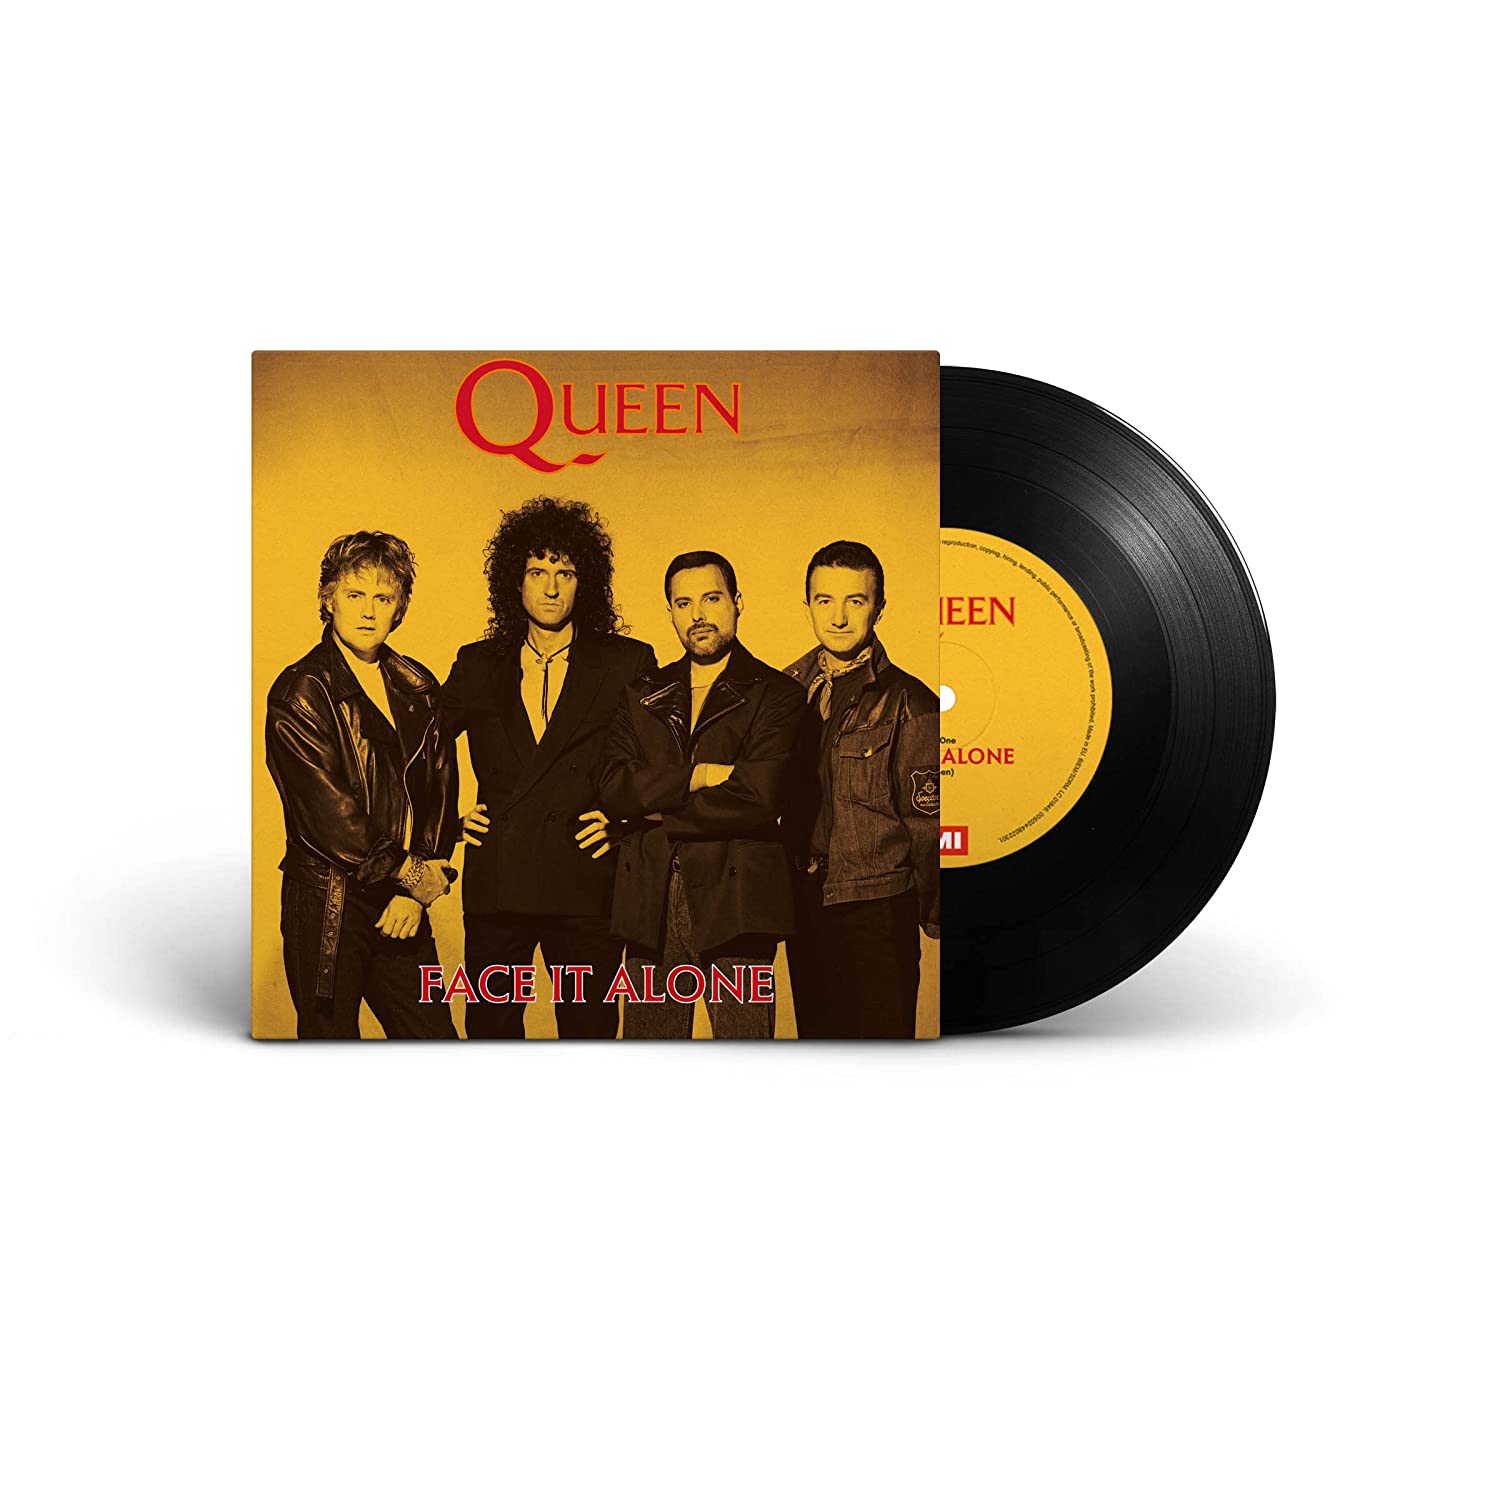 Queen – Face it alone